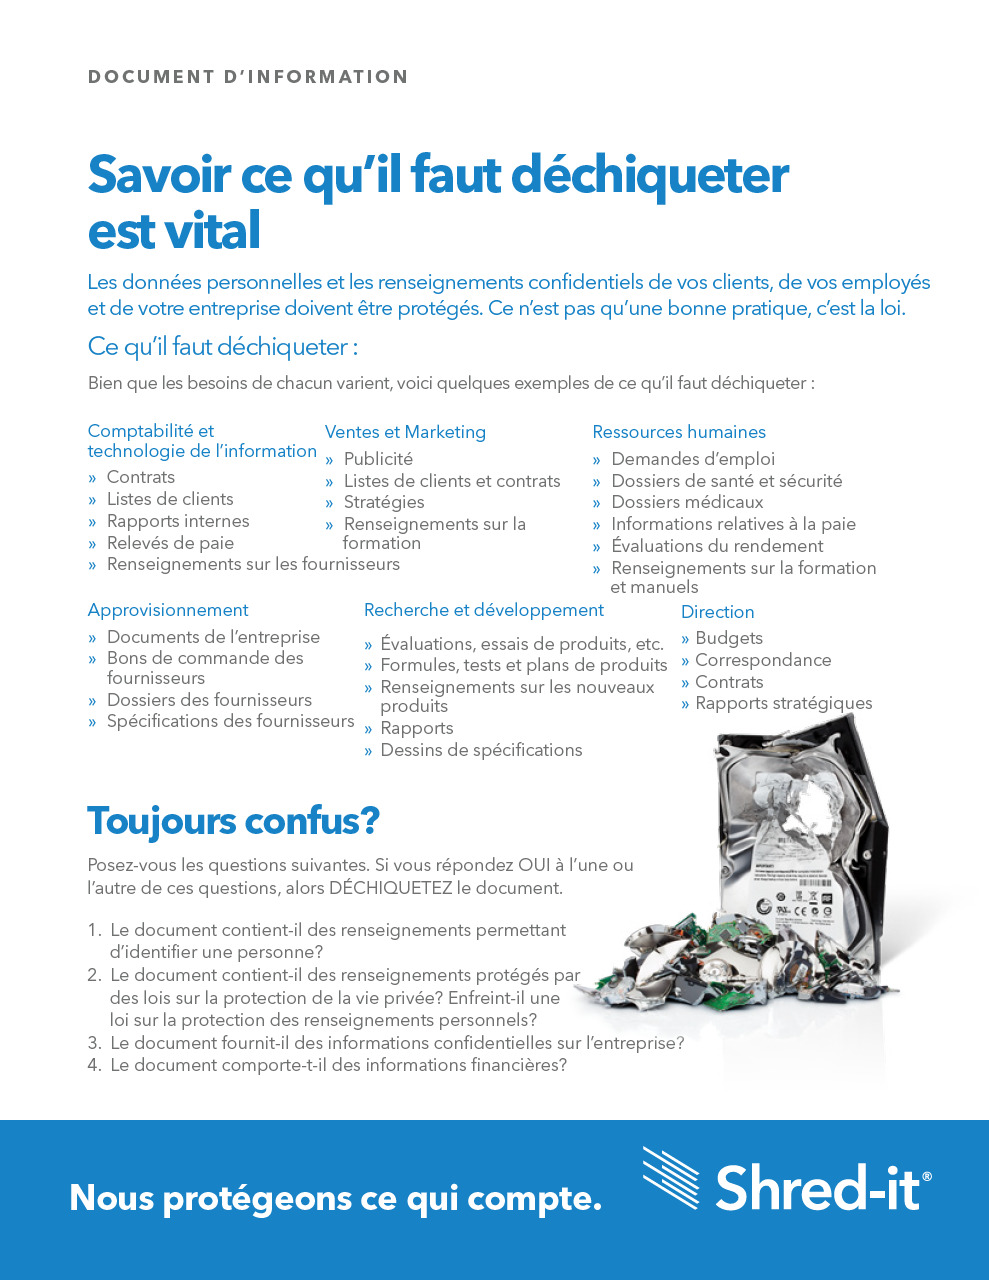 Shred-it-Knowing-What-to-Shred-French.pdf